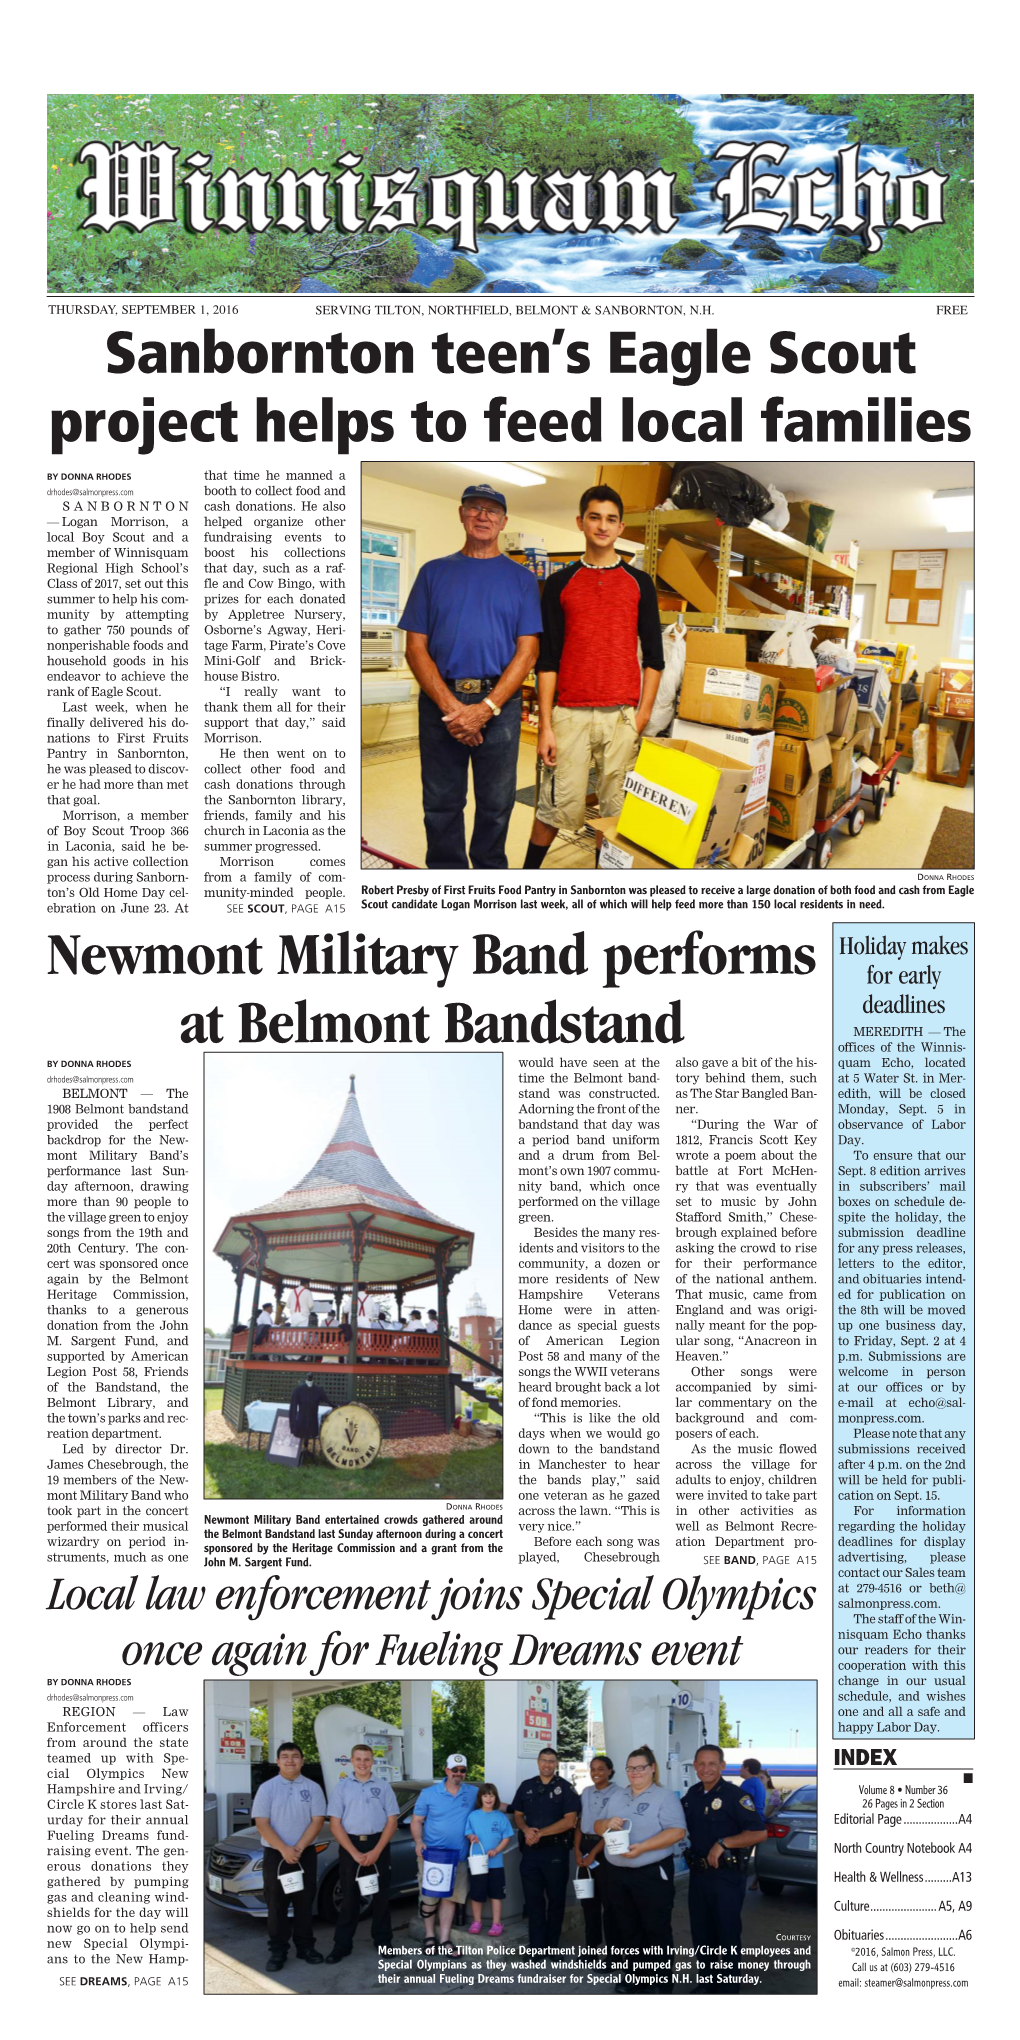 Newmont Military Band Performs at Belmont Bandstand